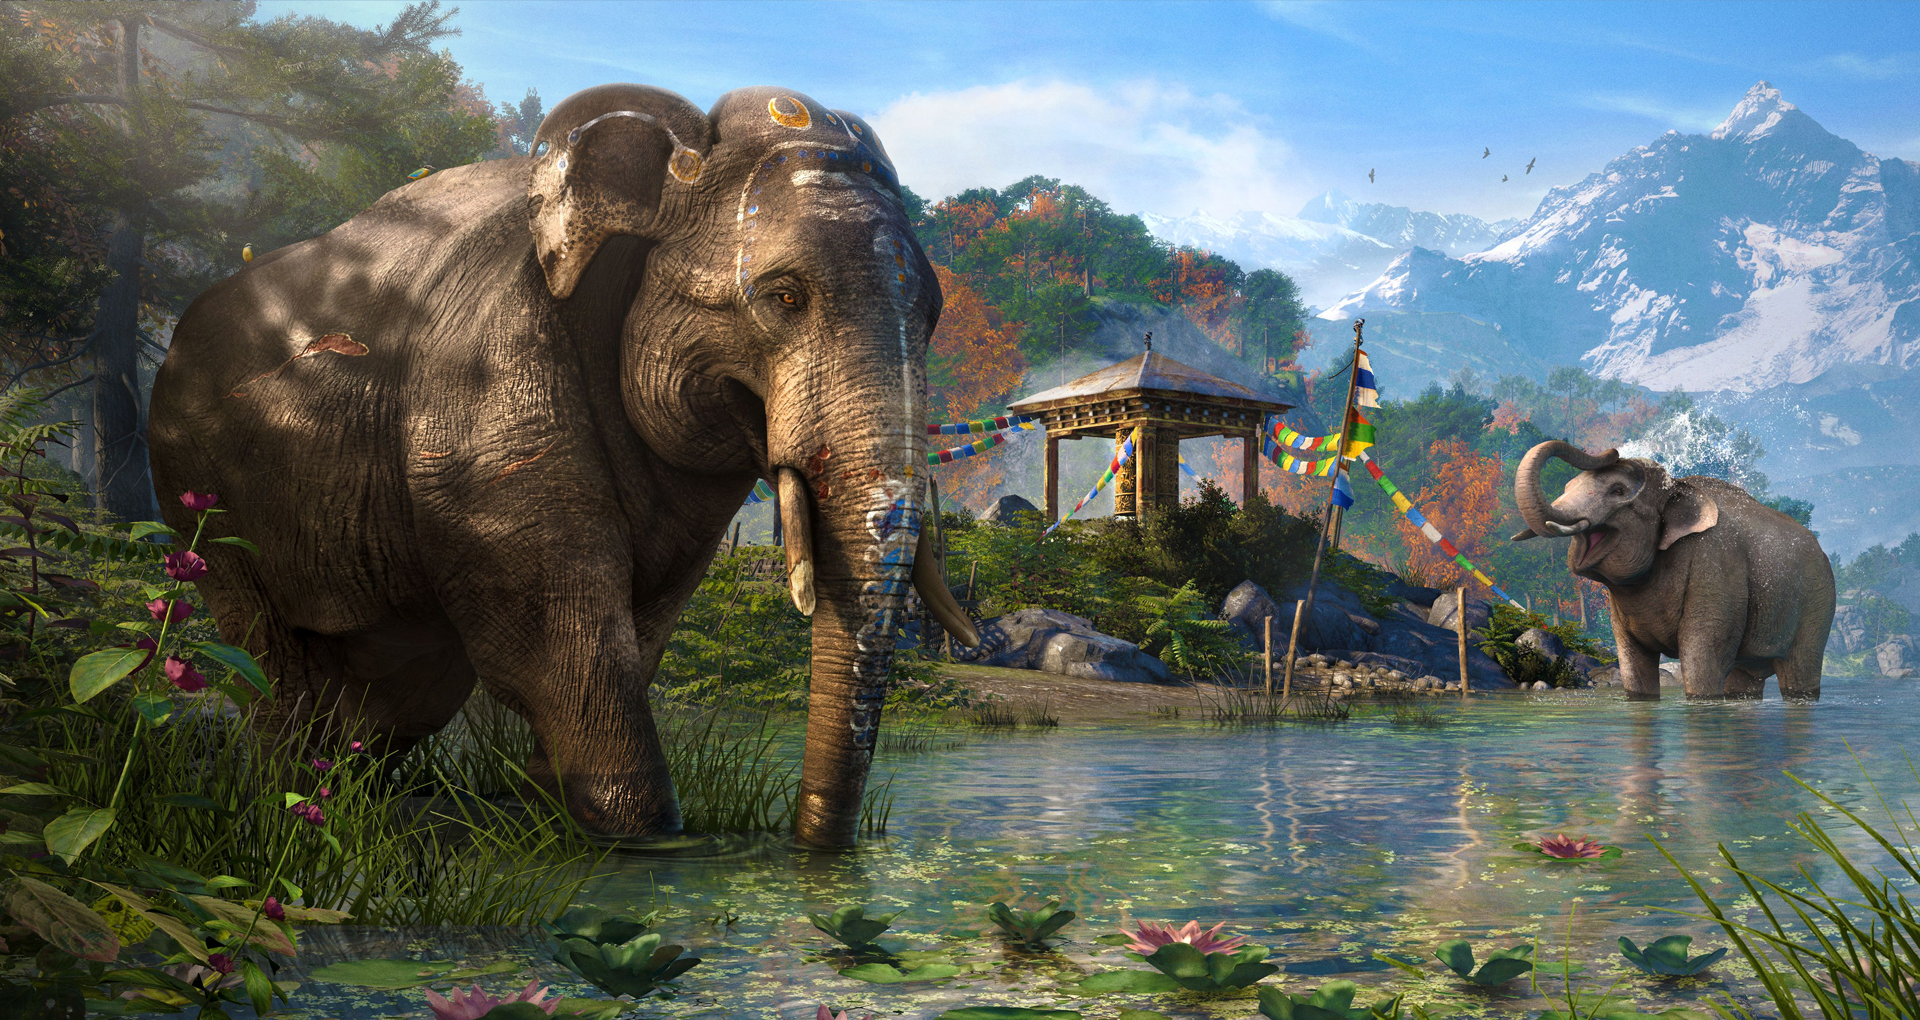 Far Cry 4 review round-up, all the scores